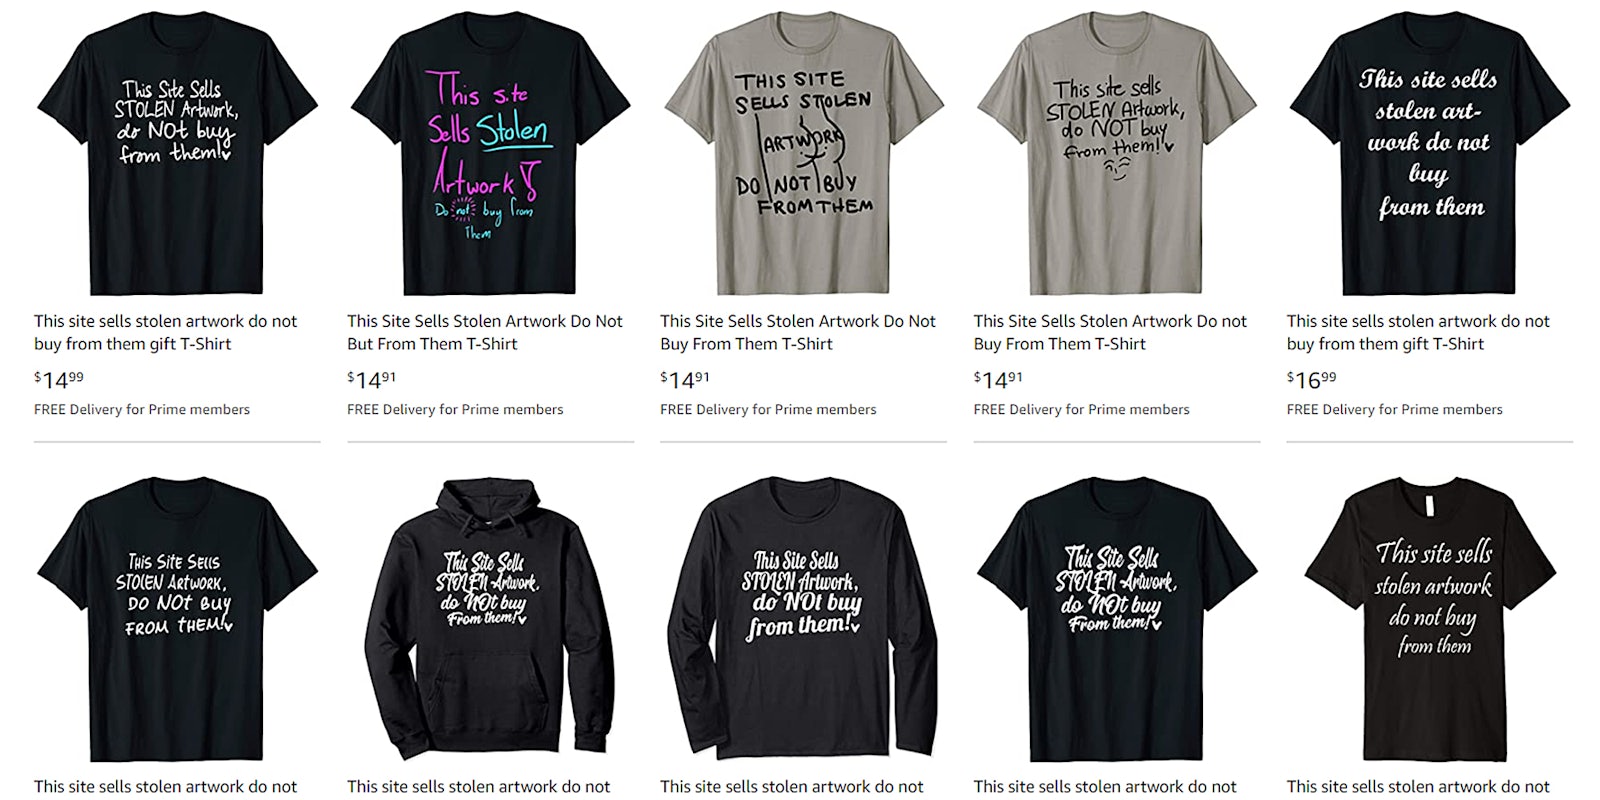 'this site sells stolen artwork, do not buy from them' shirts